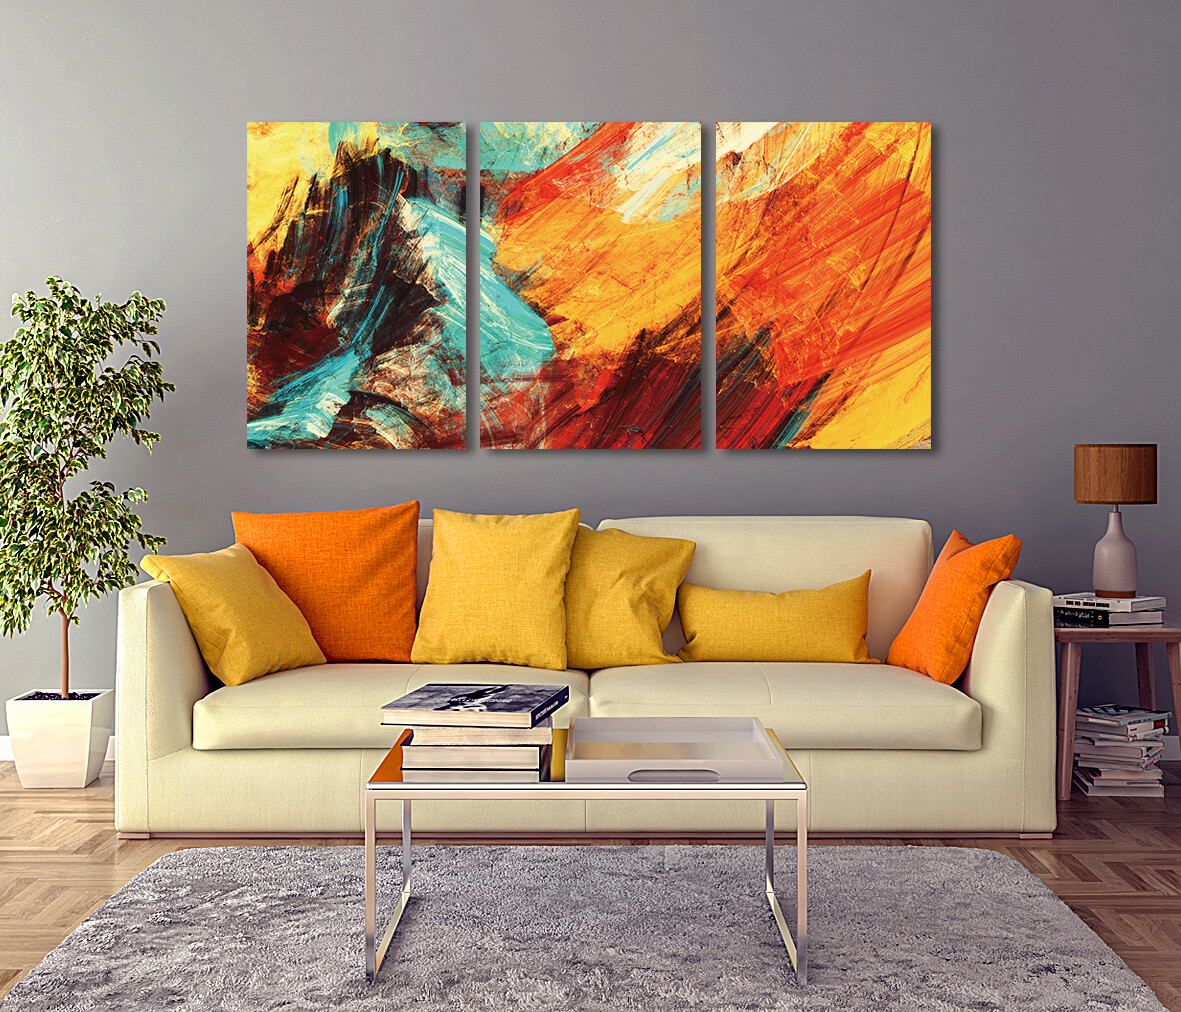 Bright Artistic Splashes - Modern Luxury Wall art Printed on Acrylic Glass - Frameless and Ready to Hang